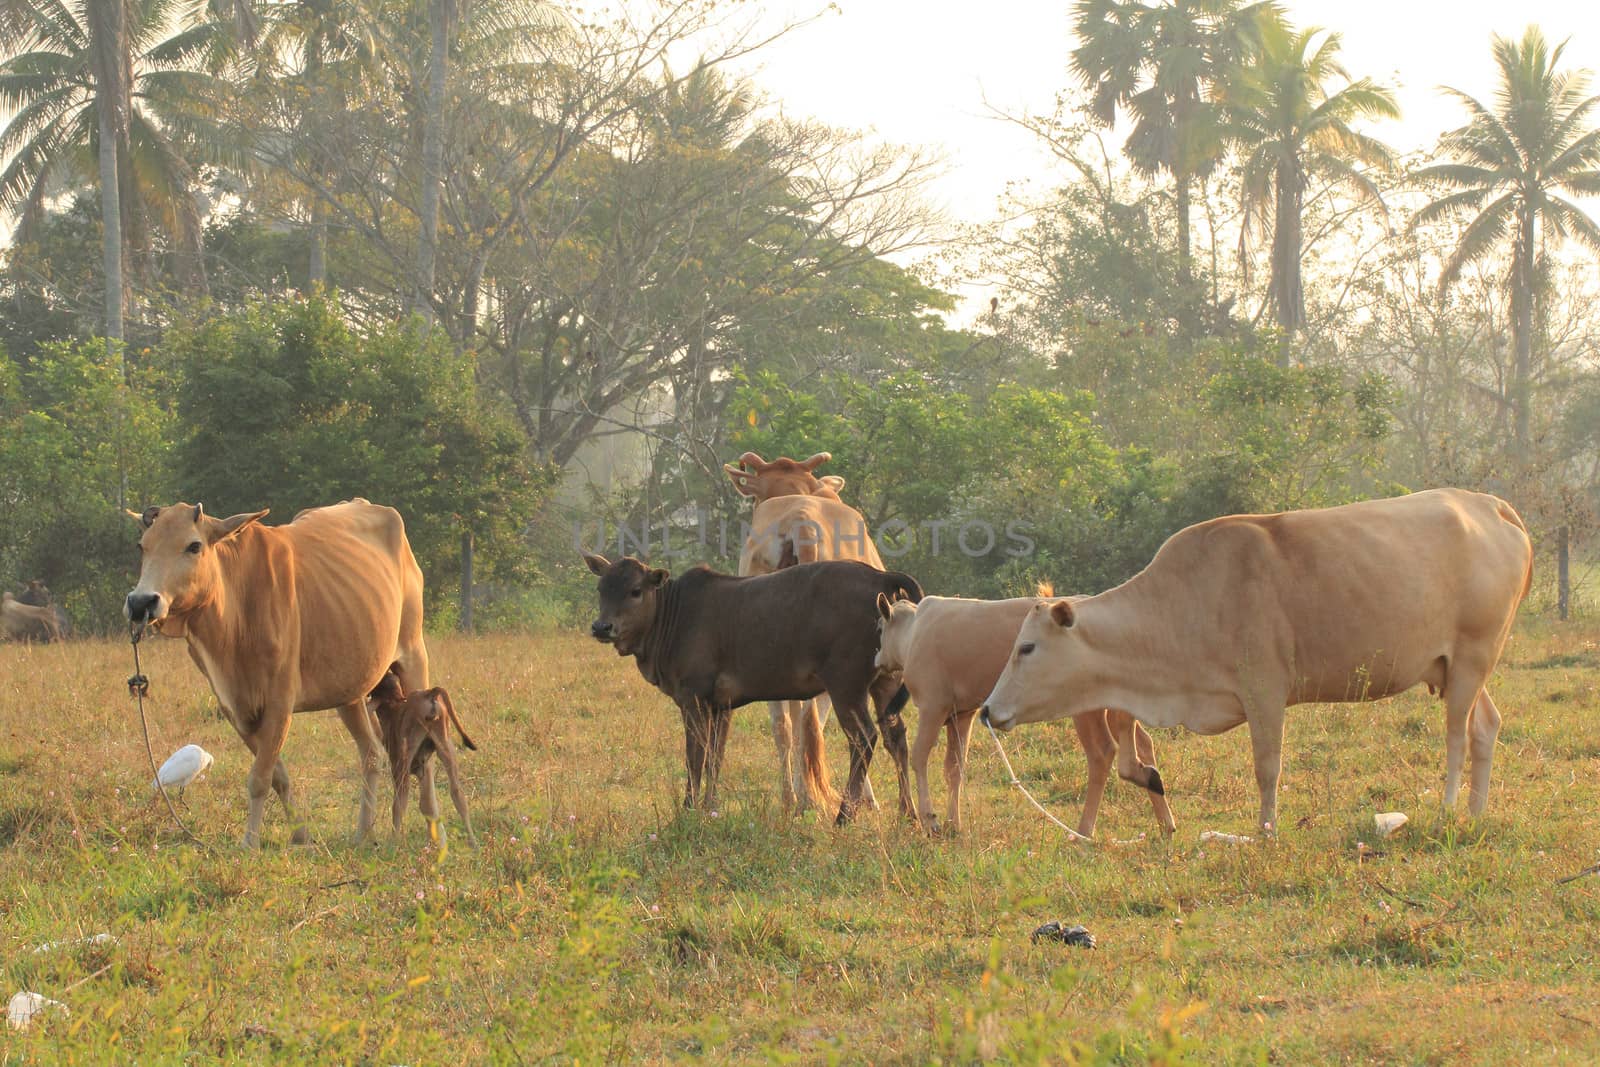 Group of cows in a field in Thailand